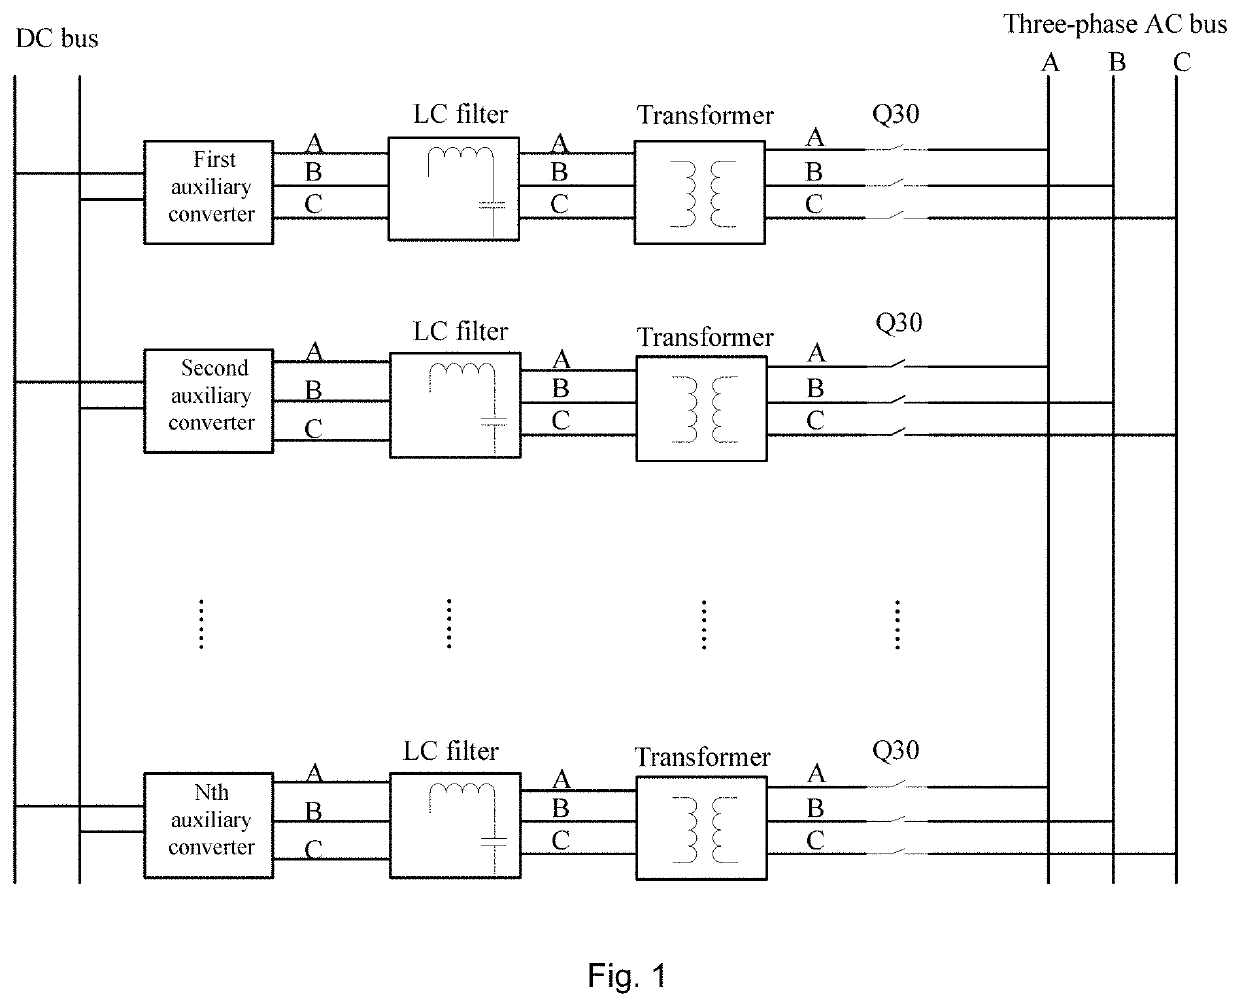 Synchronous soft-start networking control strategy for parallel auxiliary converters of emu